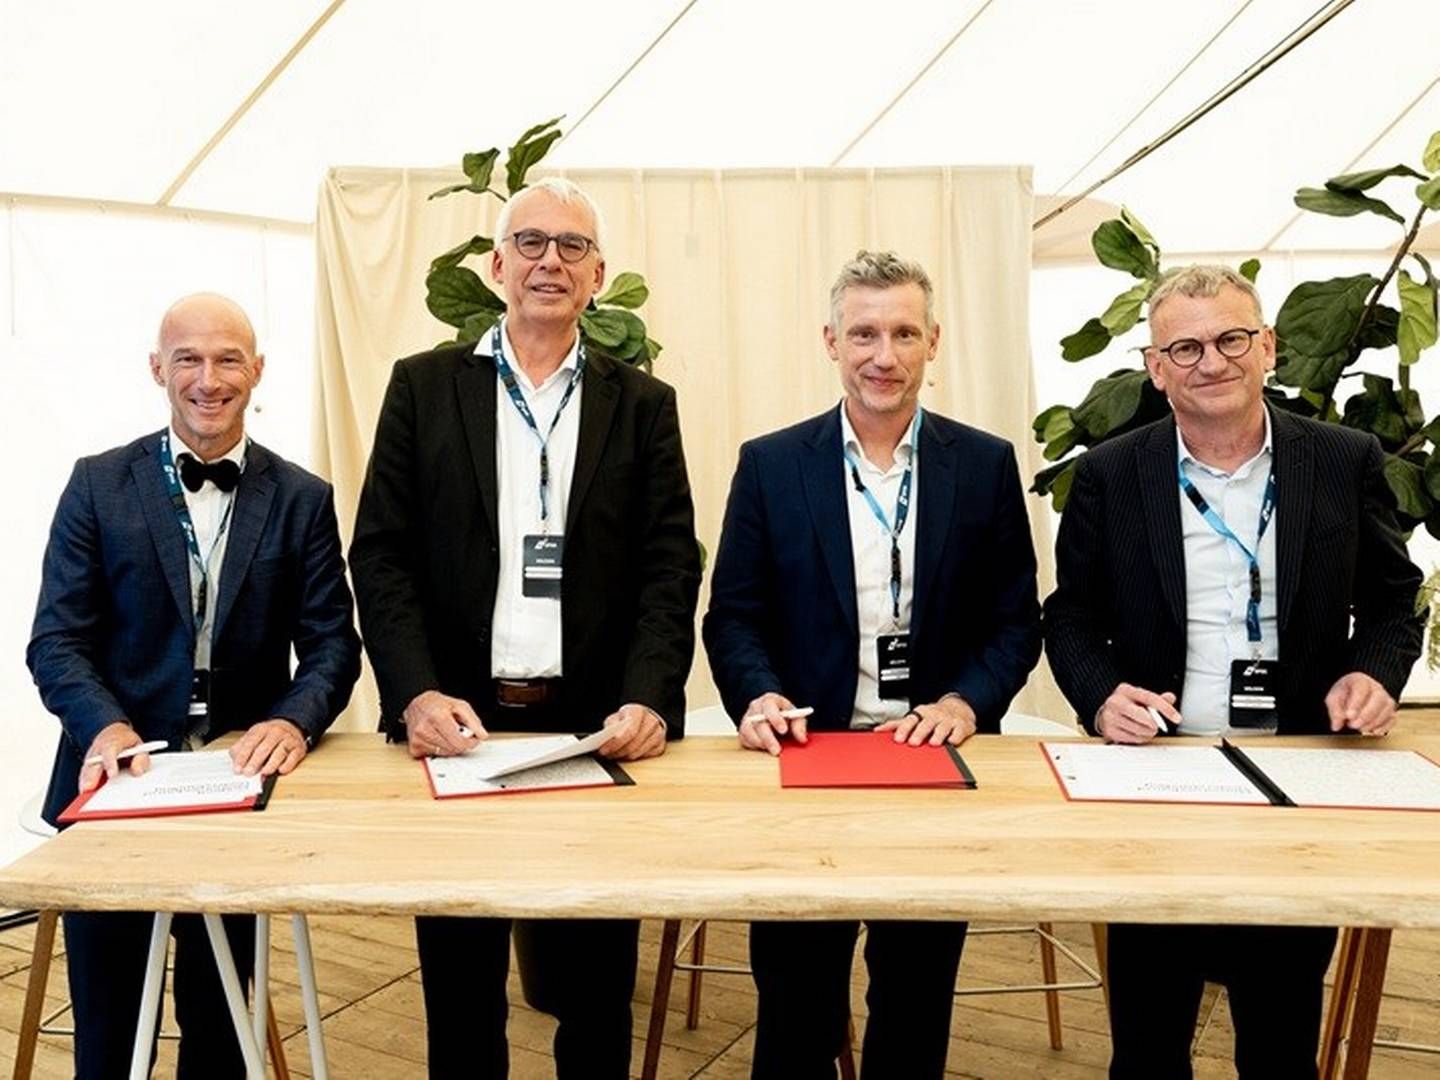 (L-R): Port of Gothenburg's Head of Strategic Development and Innovation, Patrik Benrick, Luc Arnouts, VP International Networks, Port of Antwerp-Bruges, Jacob Andersen, Vice President North Sea at DFDS and CEO of North Sea Port, Daan Schalck. | Photo: Pressebillede, DFDS